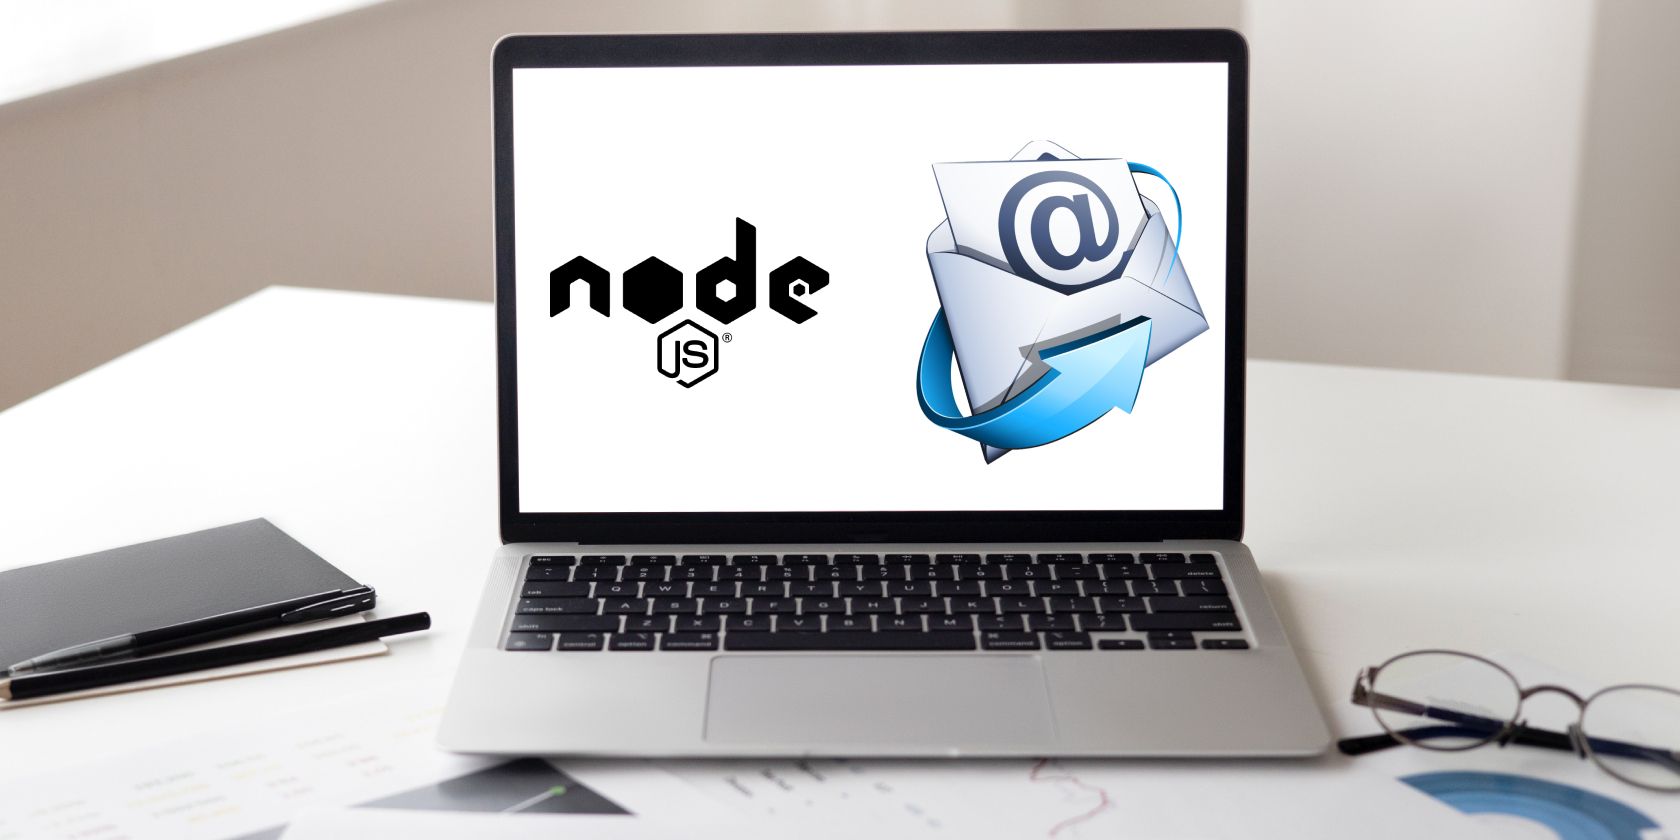 An open laptop with the Node.js logo displayed on screen, alongside an icon representing email